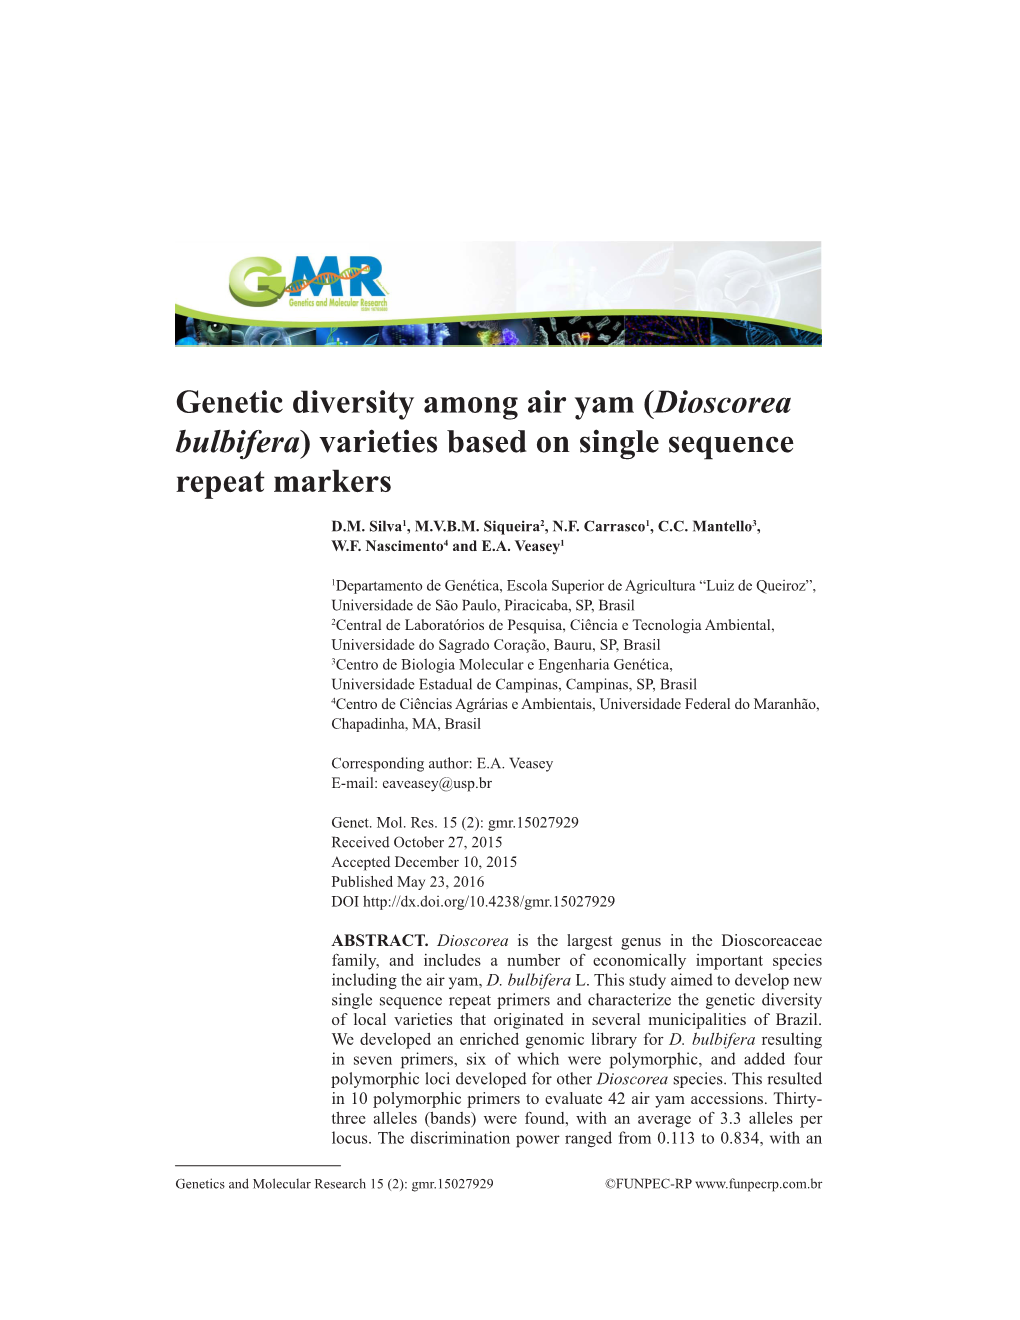 Genetic Diversity Among Air Yam (Dioscorea Bulbifera) Varieties Based on Single Sequence Repeat Markers